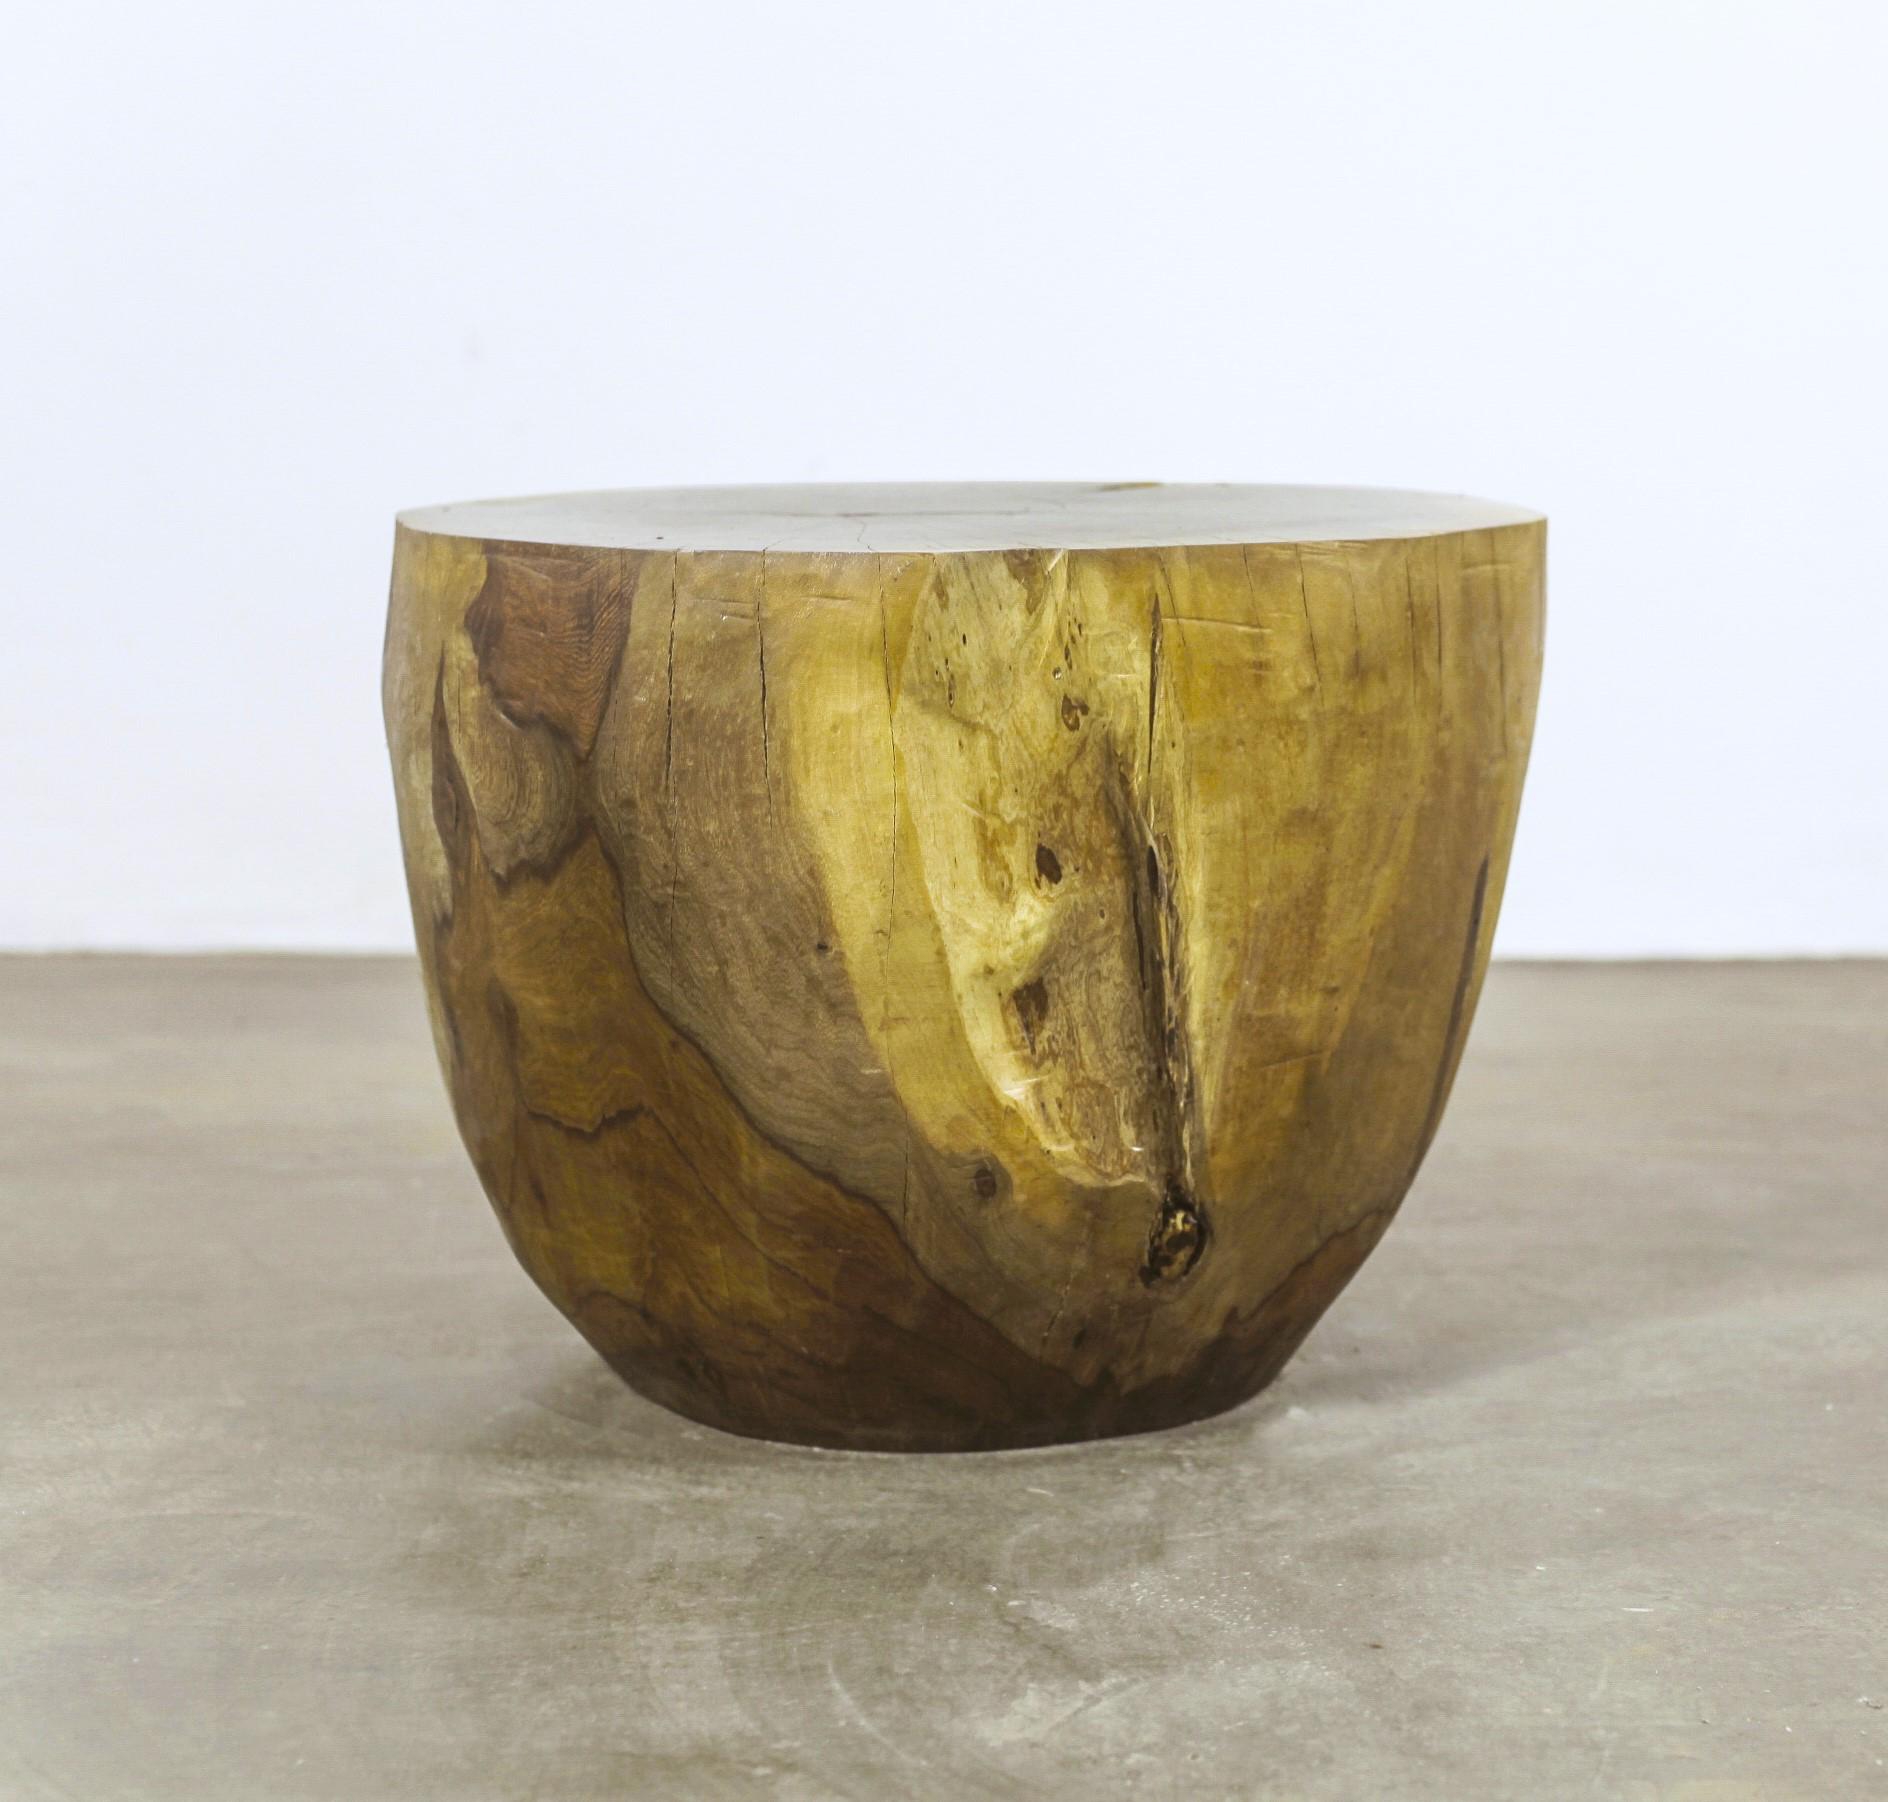 Francisco hand carved live edge solid wood trunk table ƒ4 by Costantini, in Stock

Measurements are 22